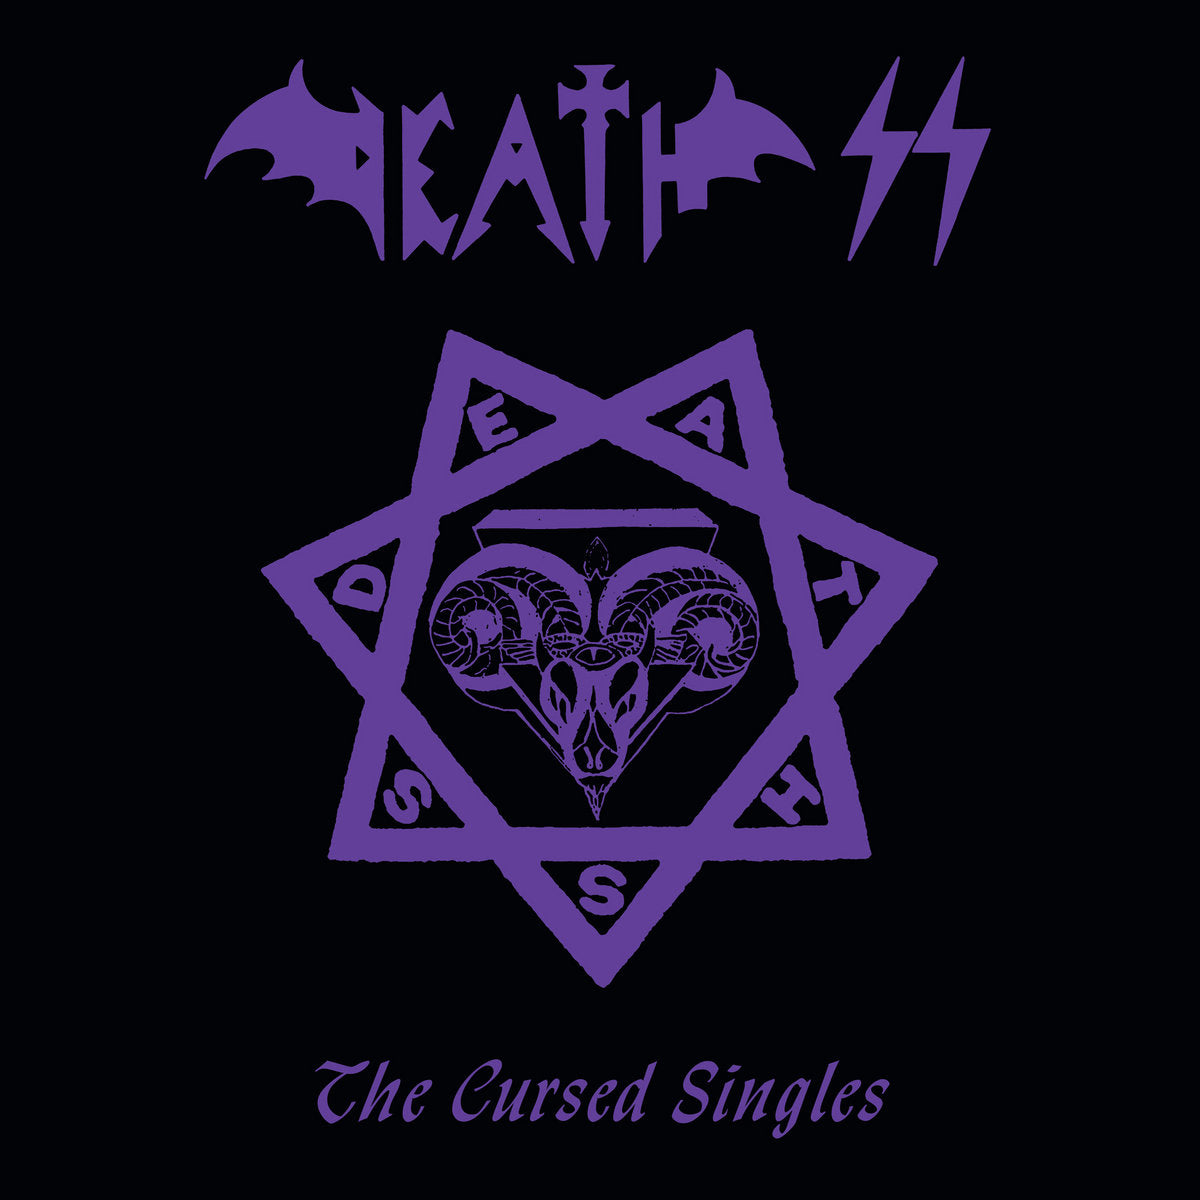 Death SS - The Cursed Singles